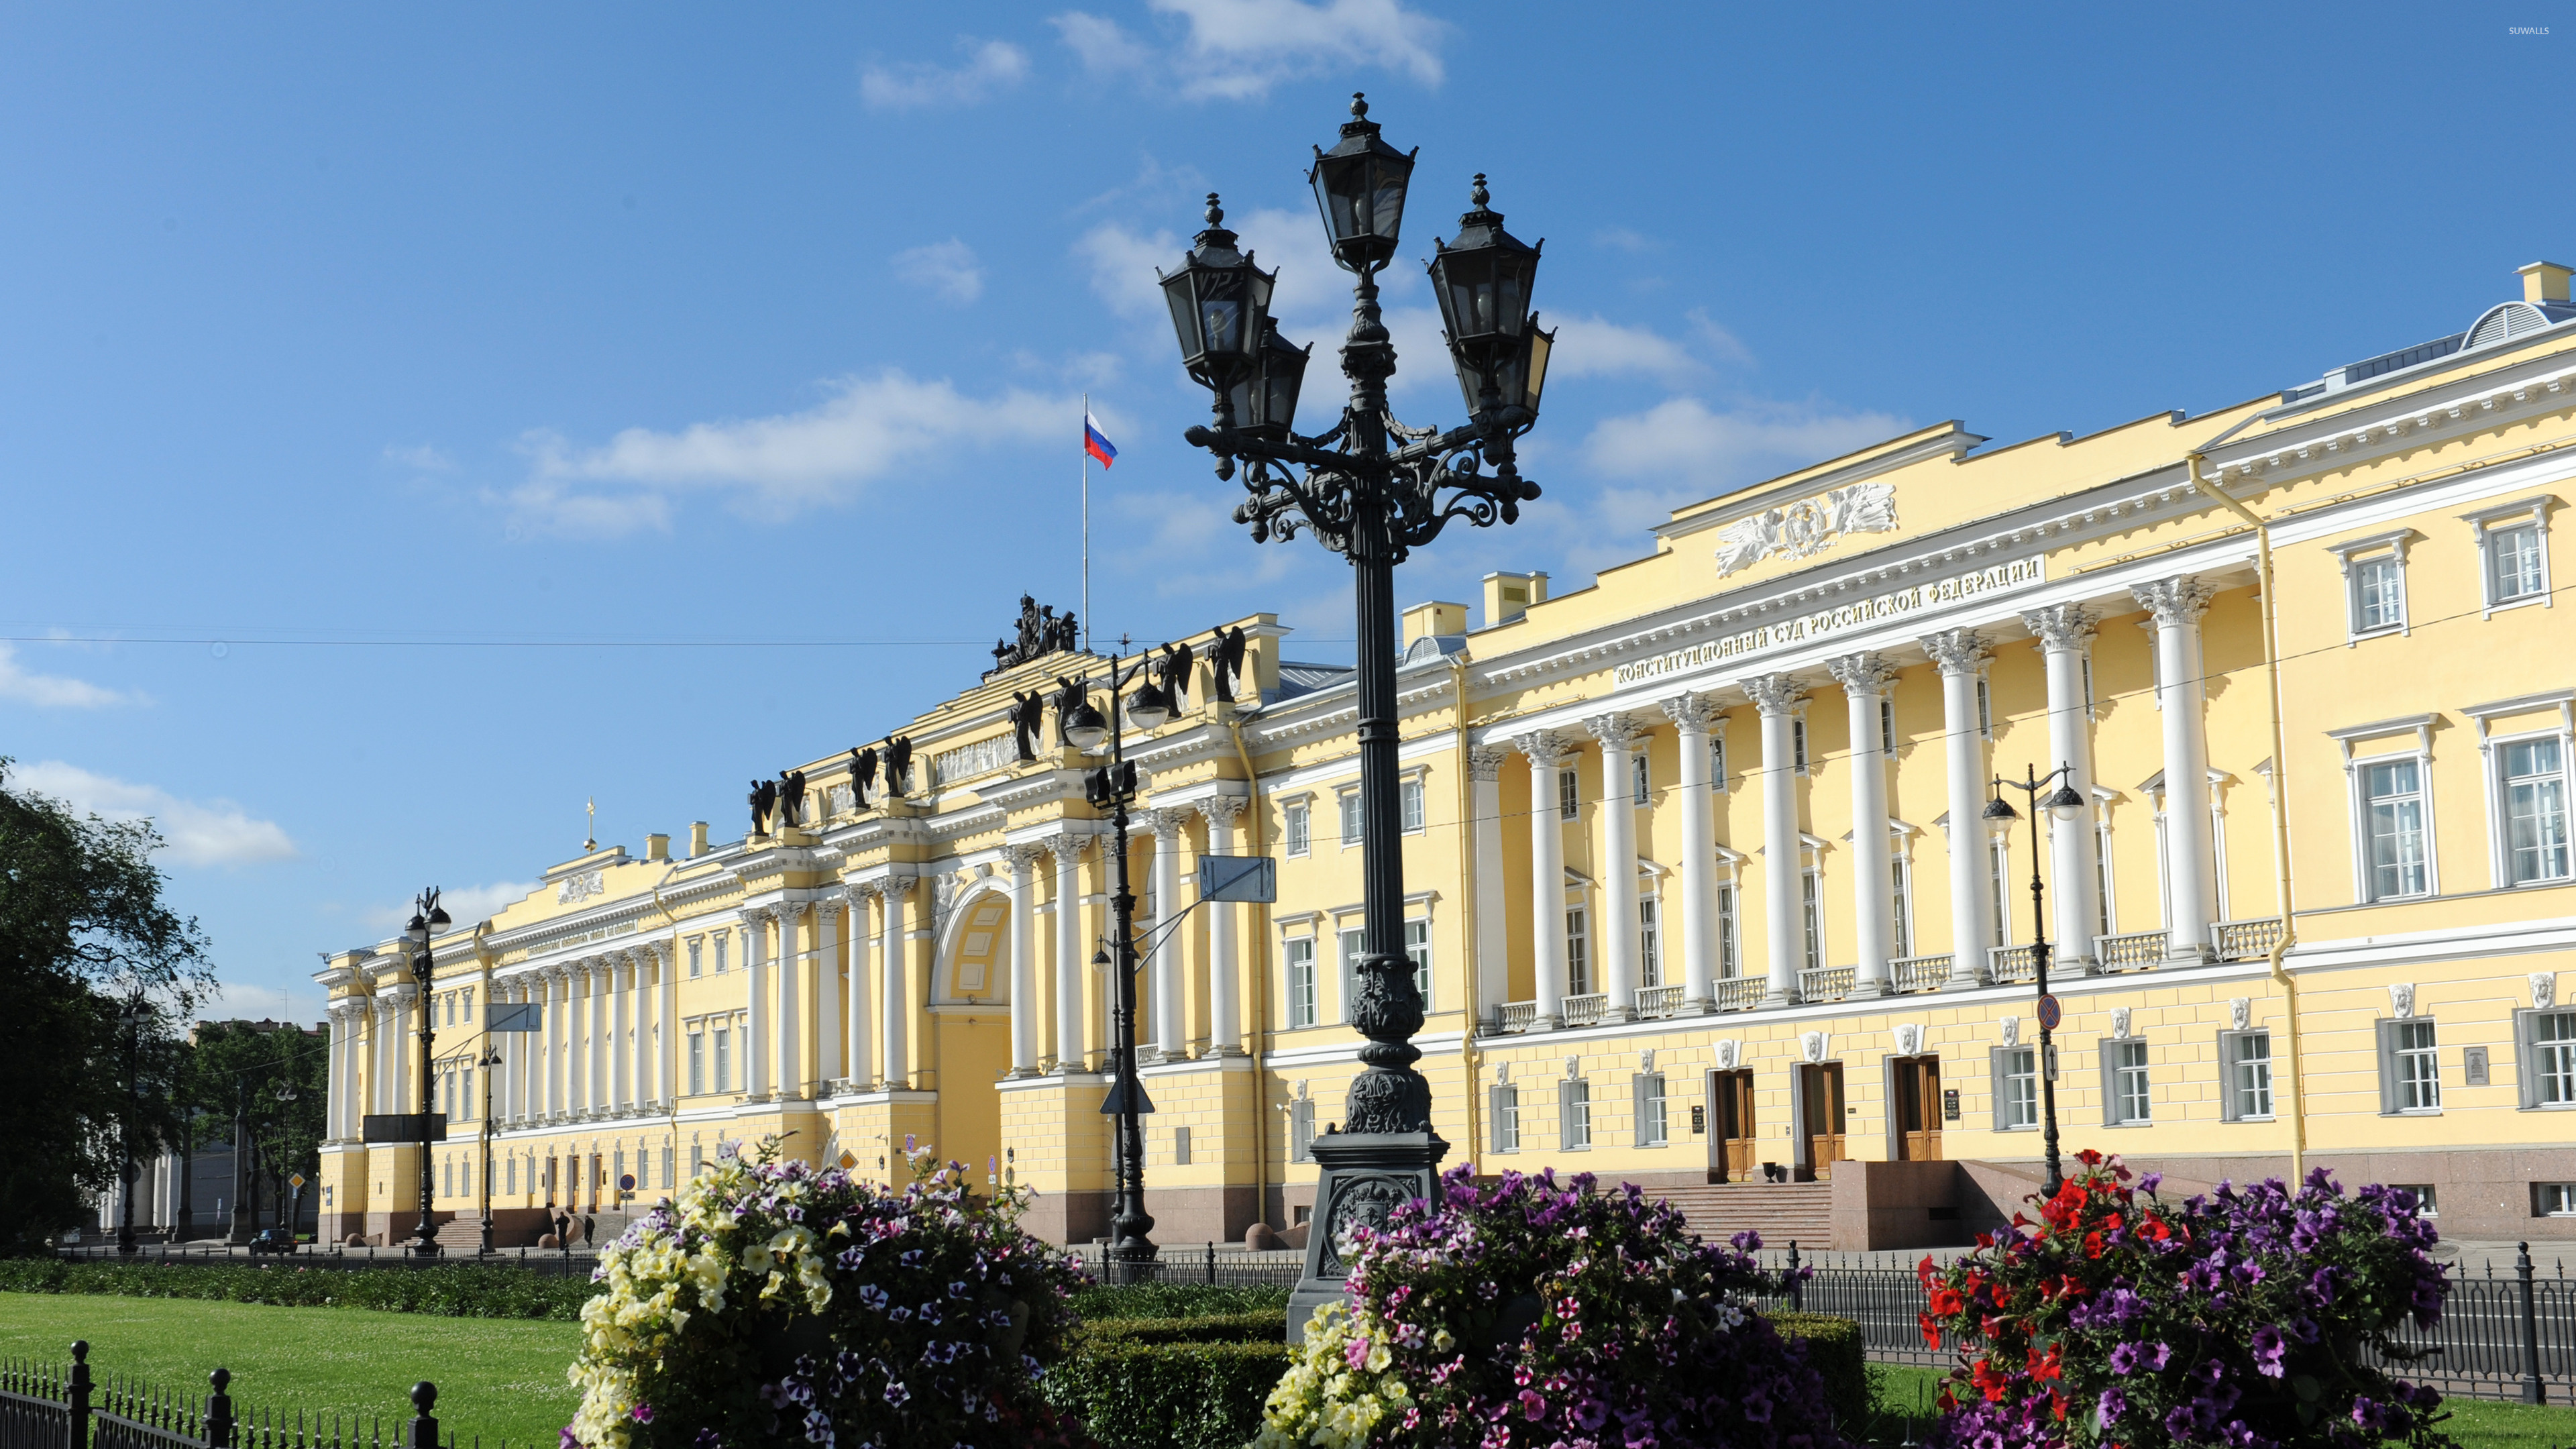 Palace: Peterhof, Commissioned by Peter the Great, UNESCO World Heritage Site. 3840x2160 4K Wallpaper.